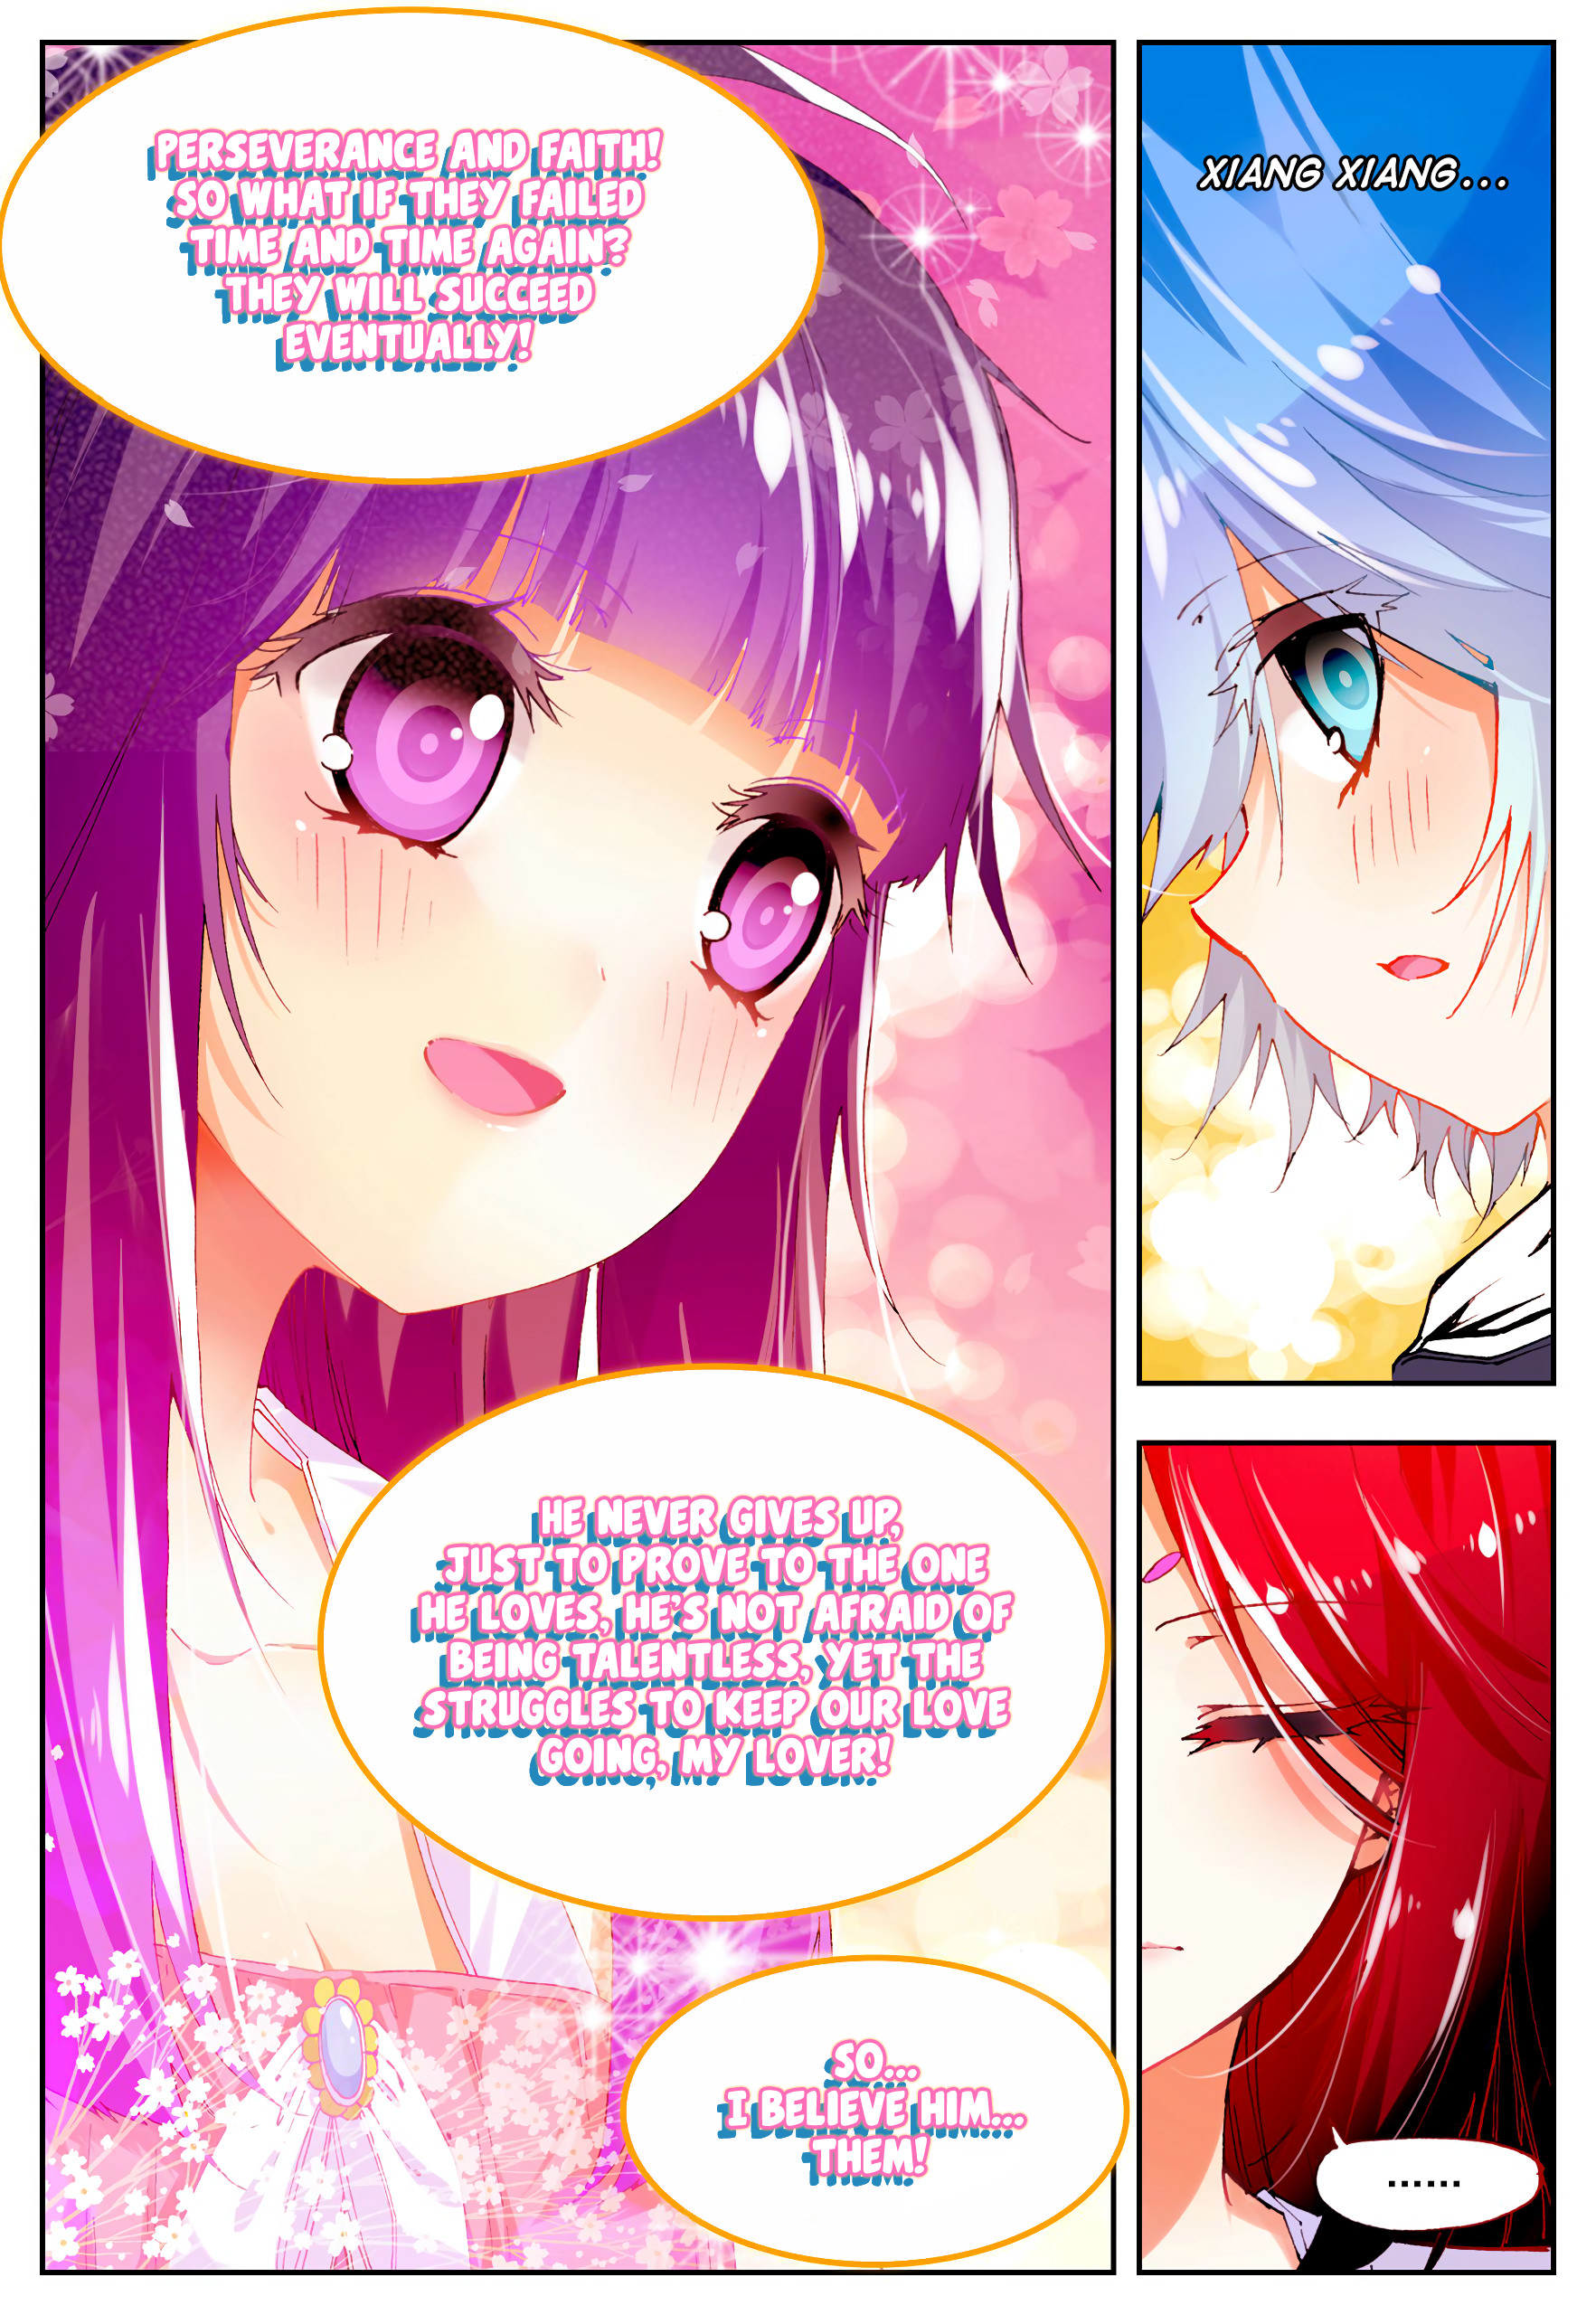 X Epoch of Dragon Chapter 46: Expectation of Love!